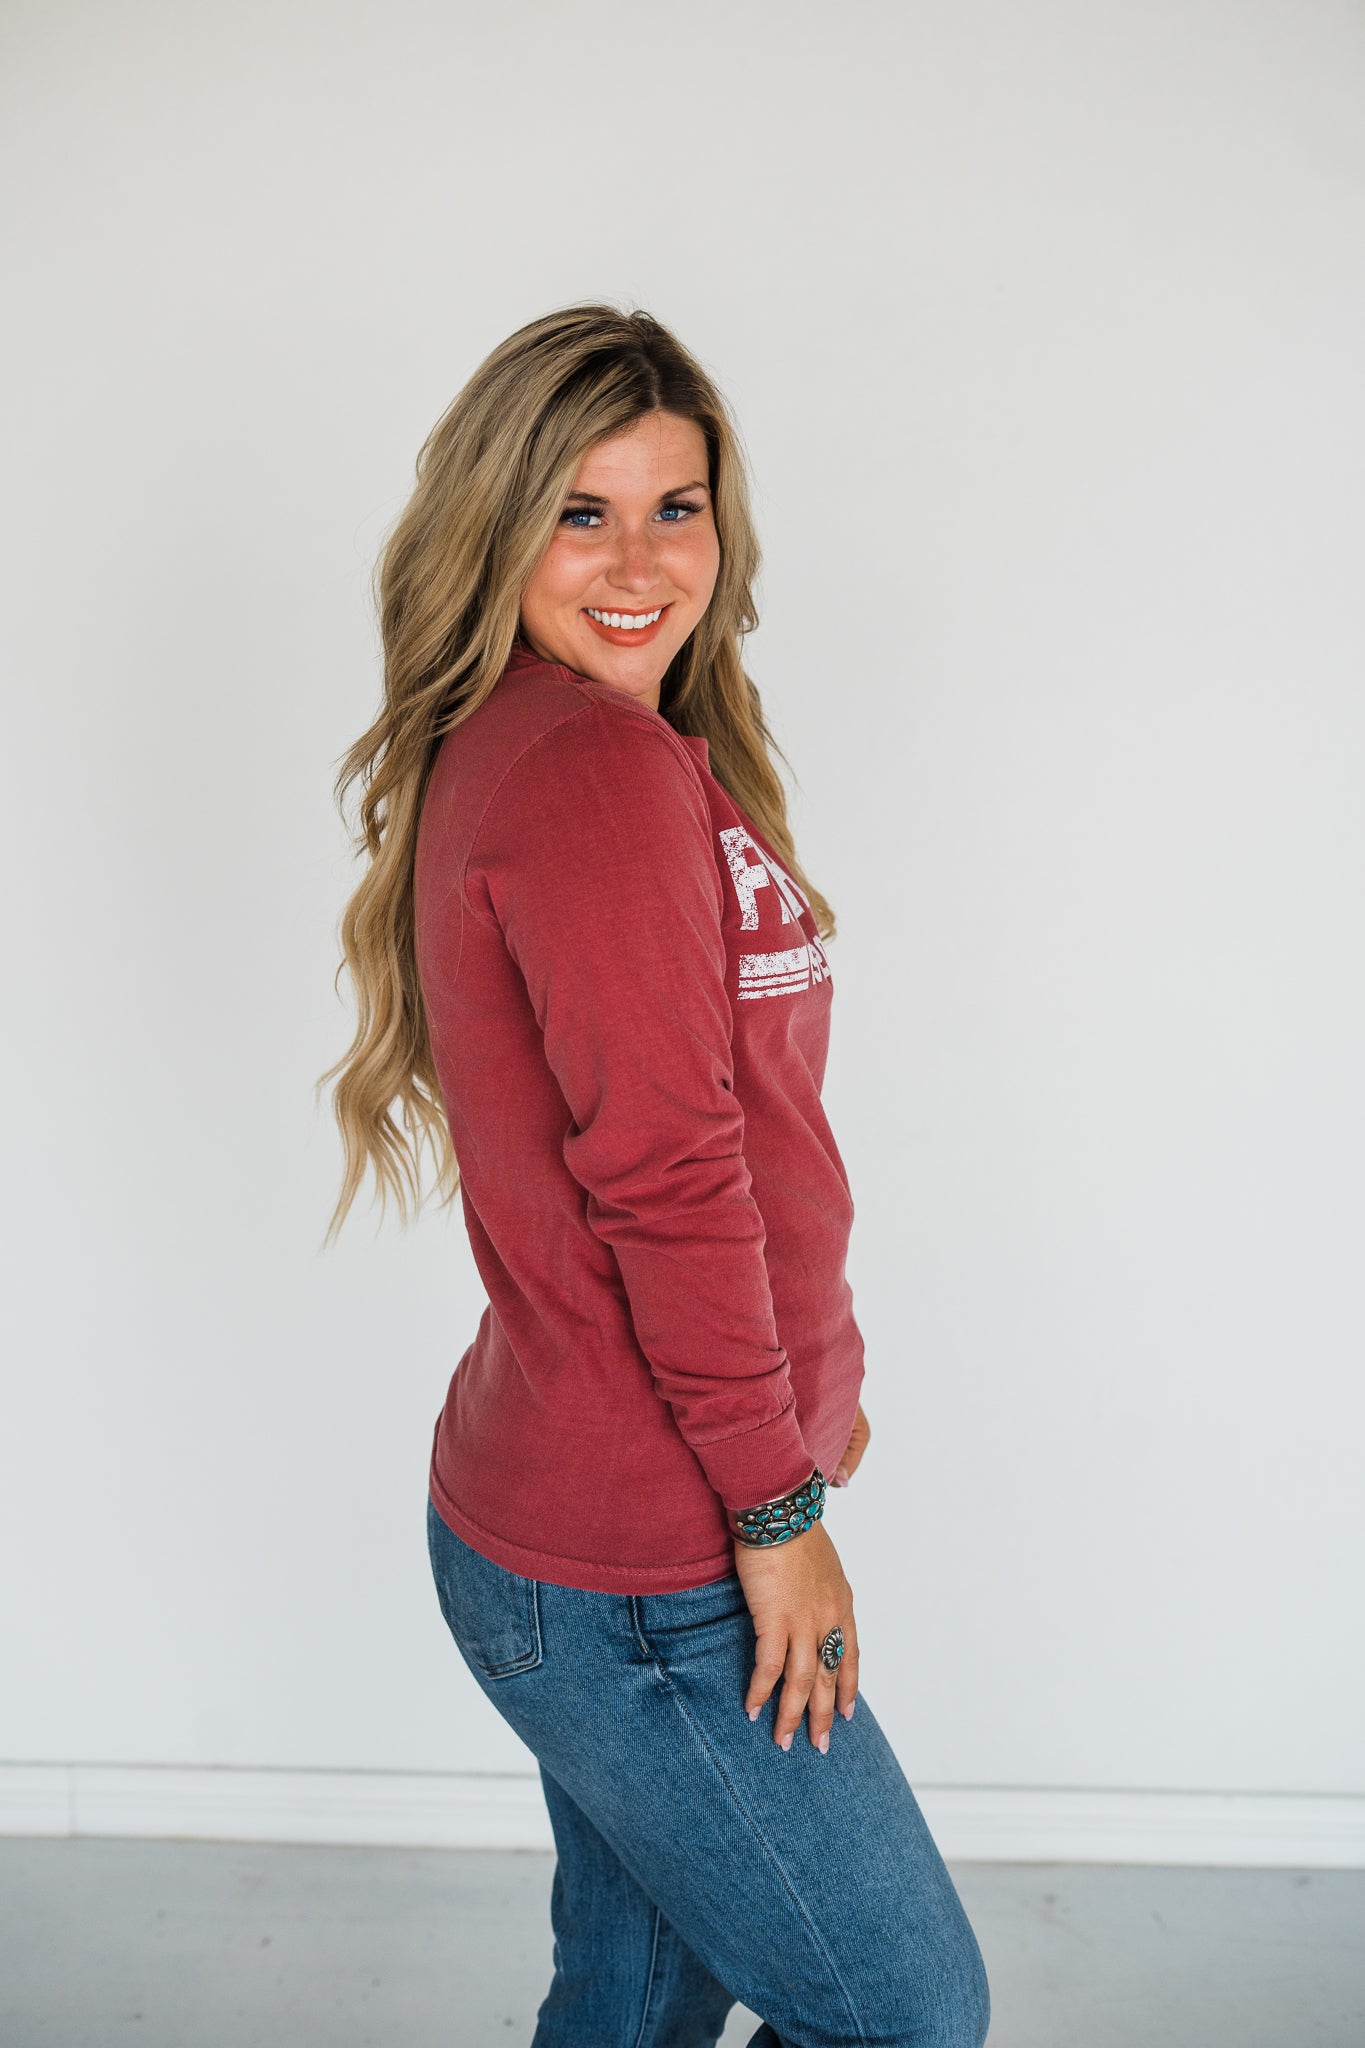 "Est 2013" Classic FarmHer Brick Red Long Sleeve Graphic Tee